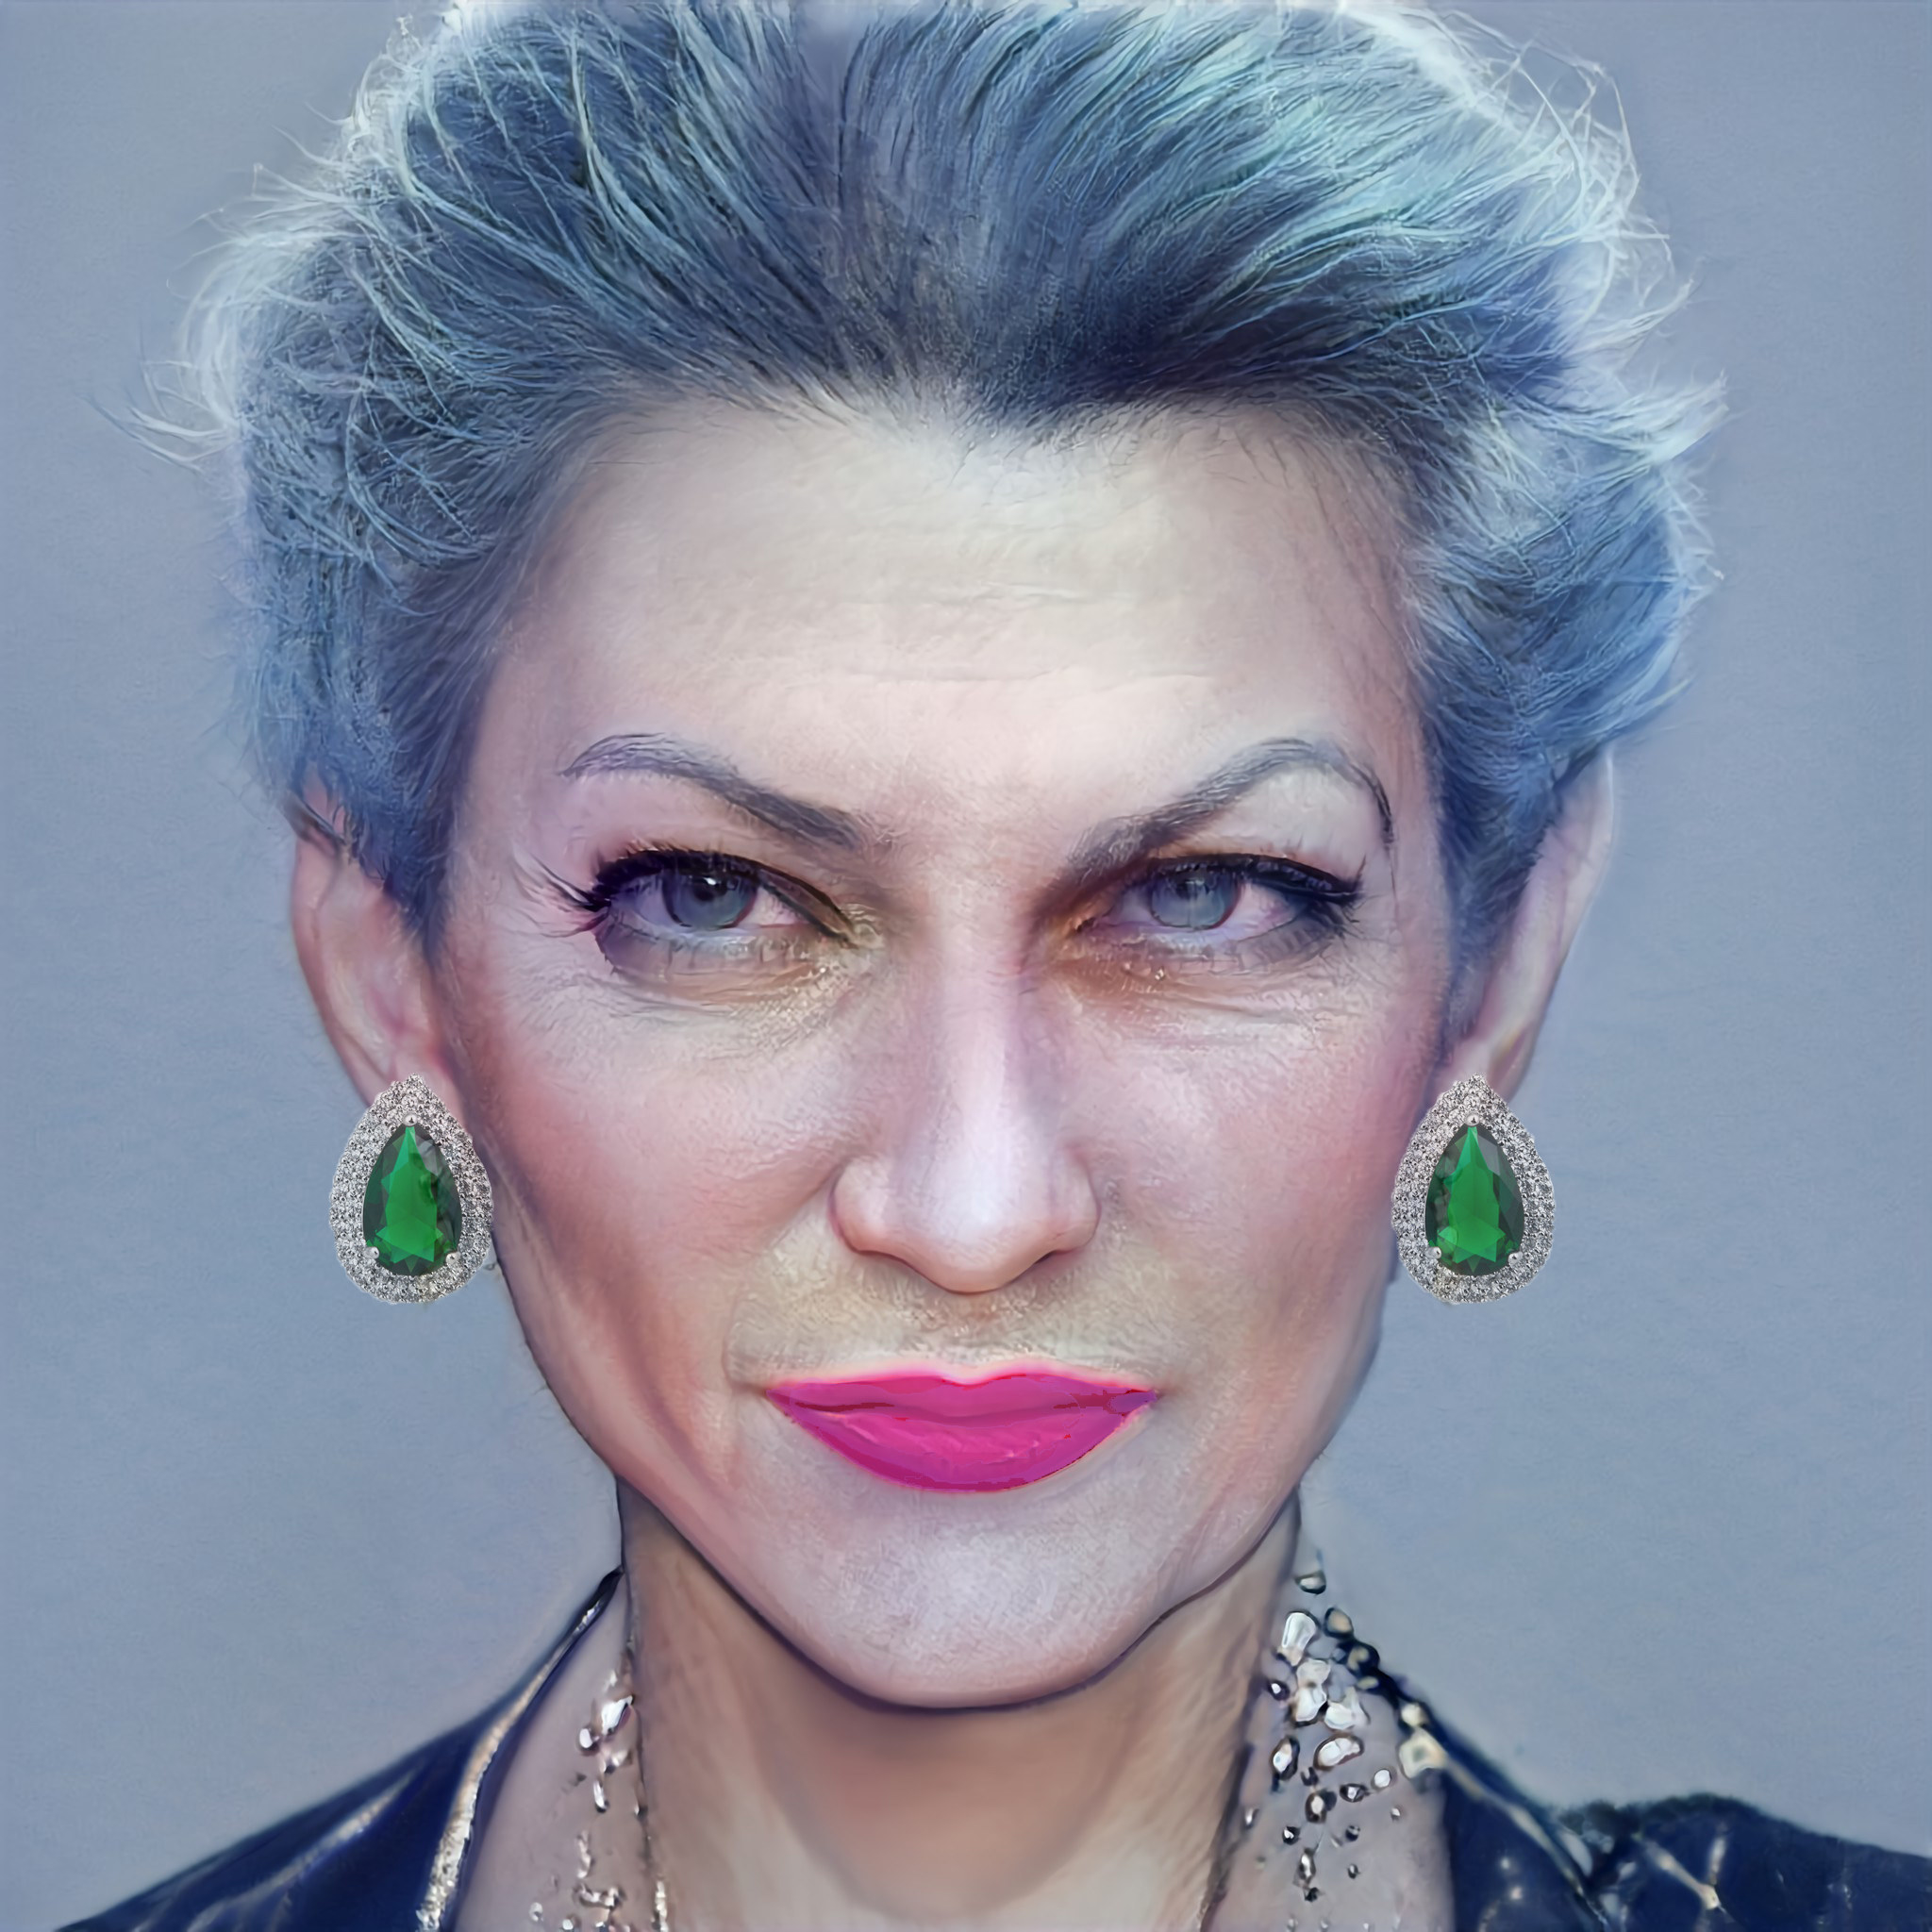 Lady Tremaine with earrings and gray hair pulled back